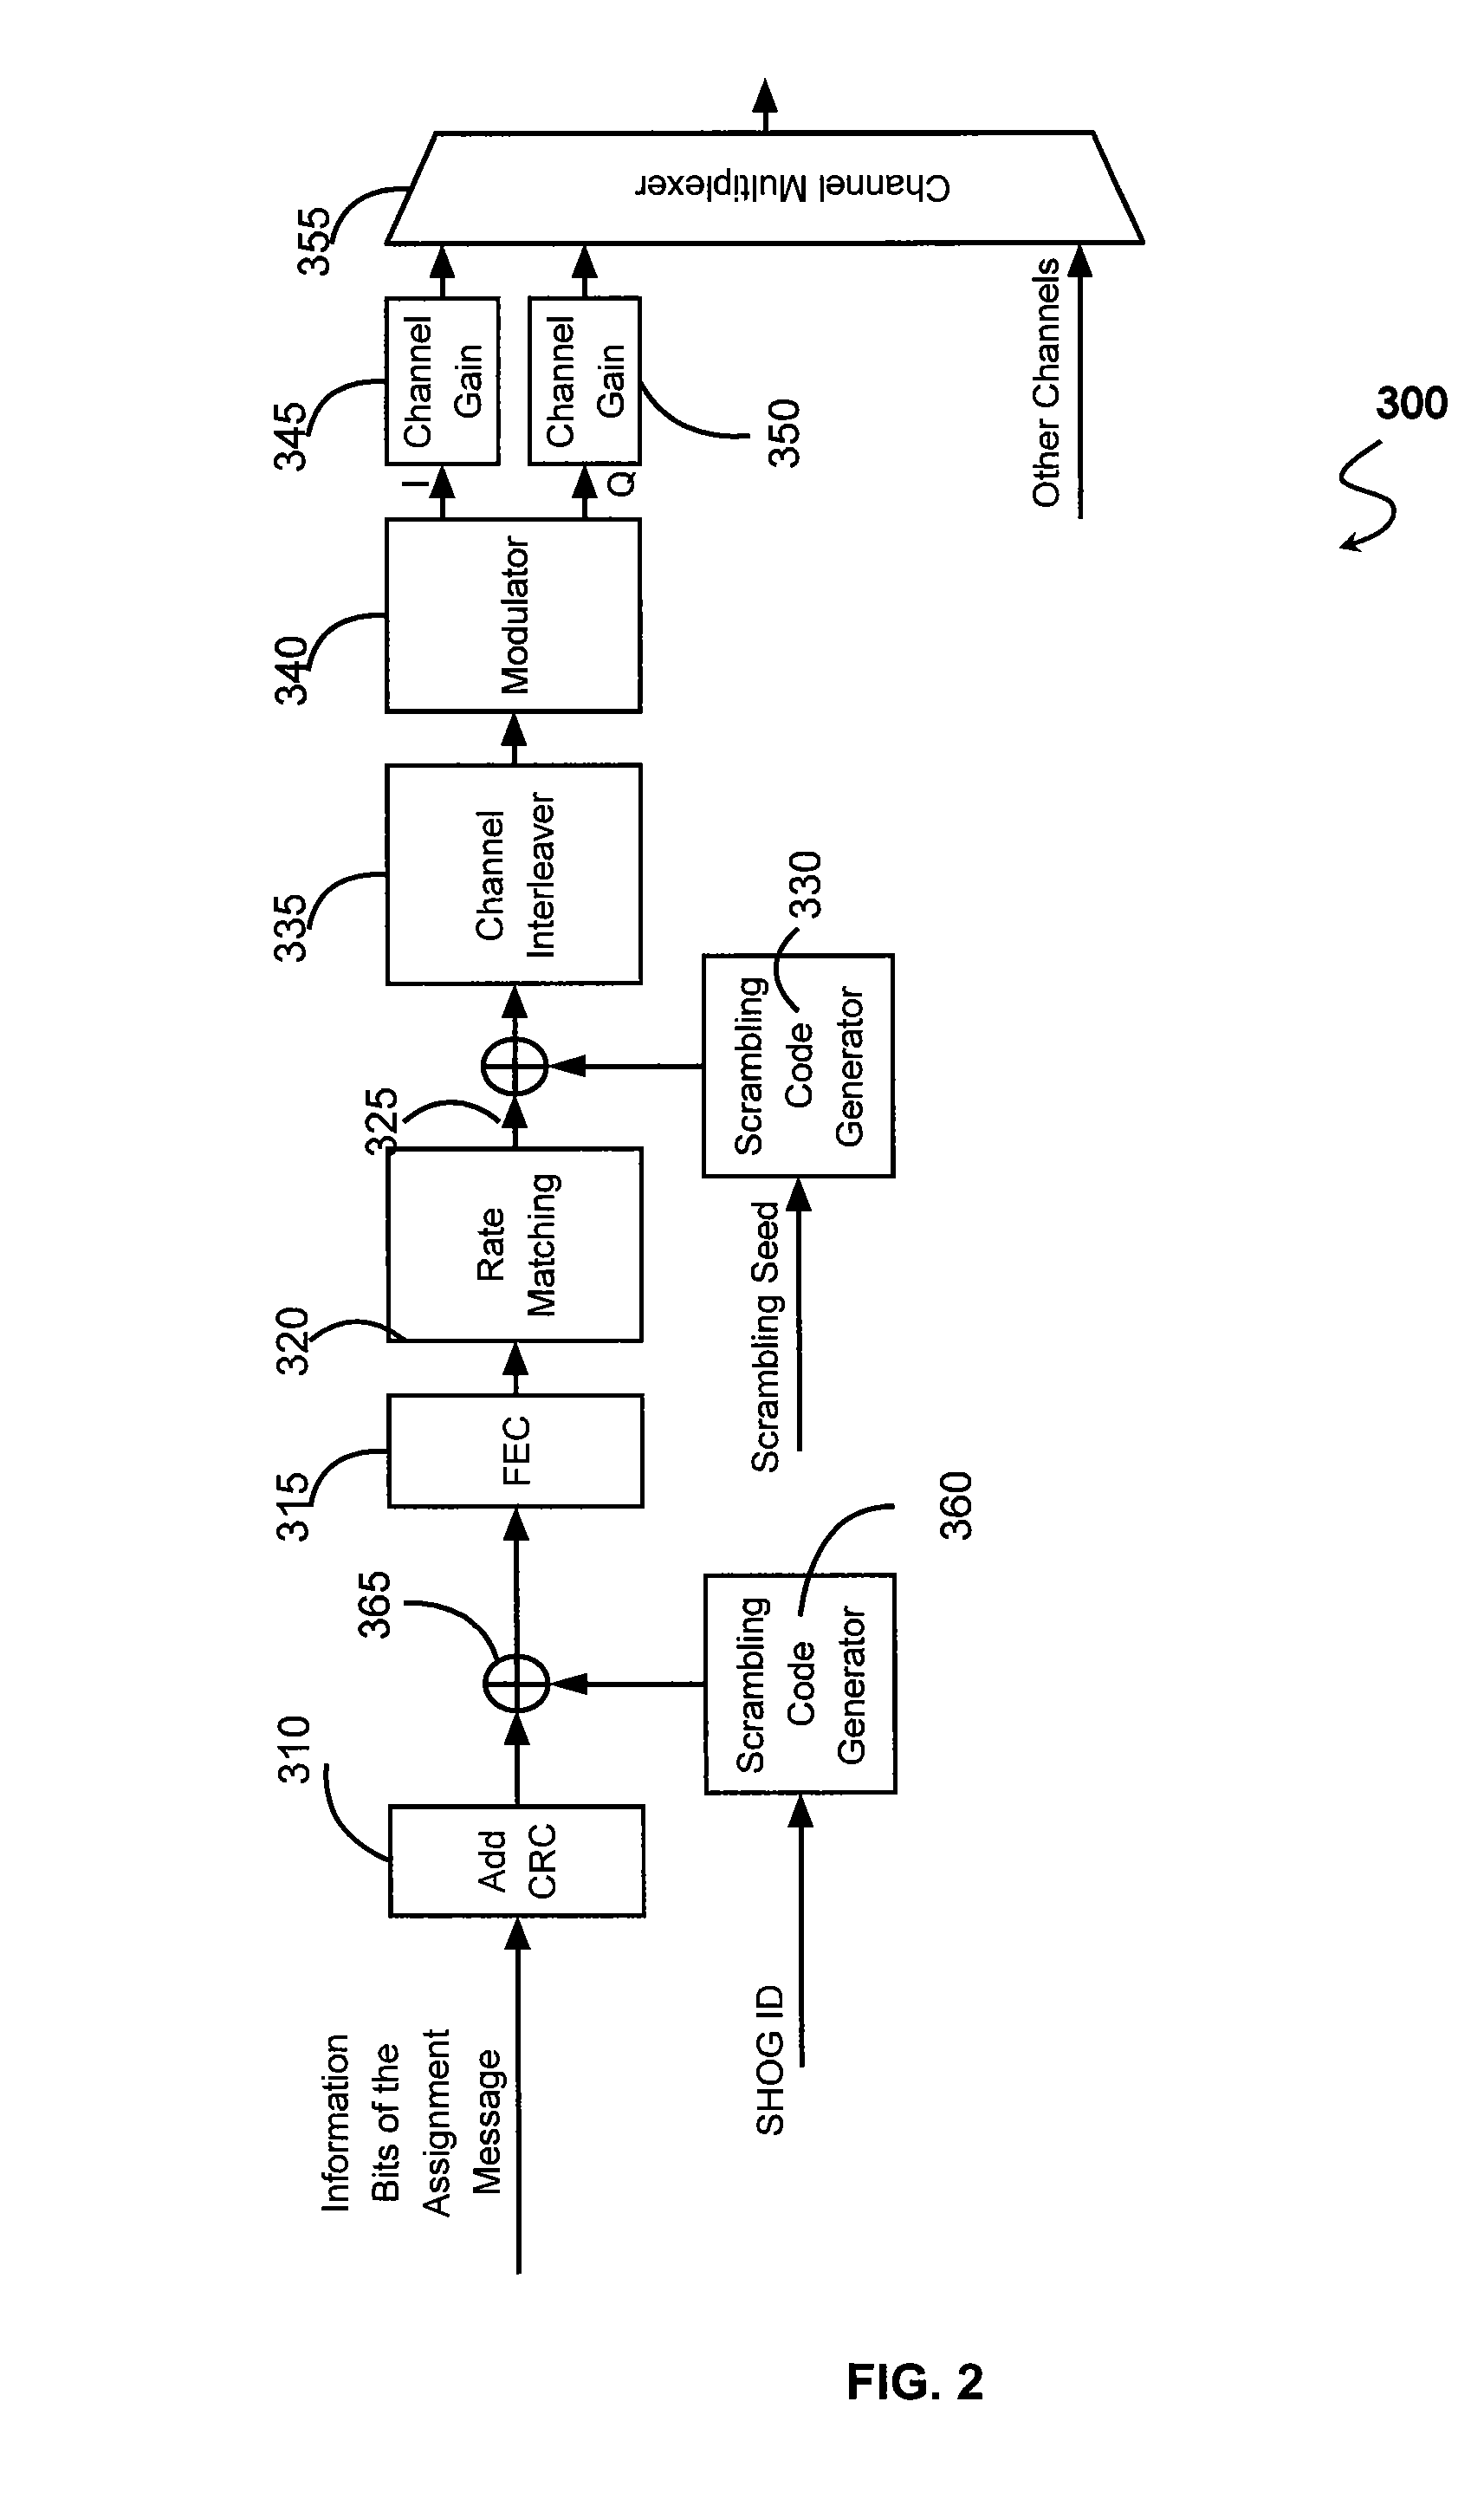 System for control, management, and transmission for soft handoff in an ofdma-based communication system